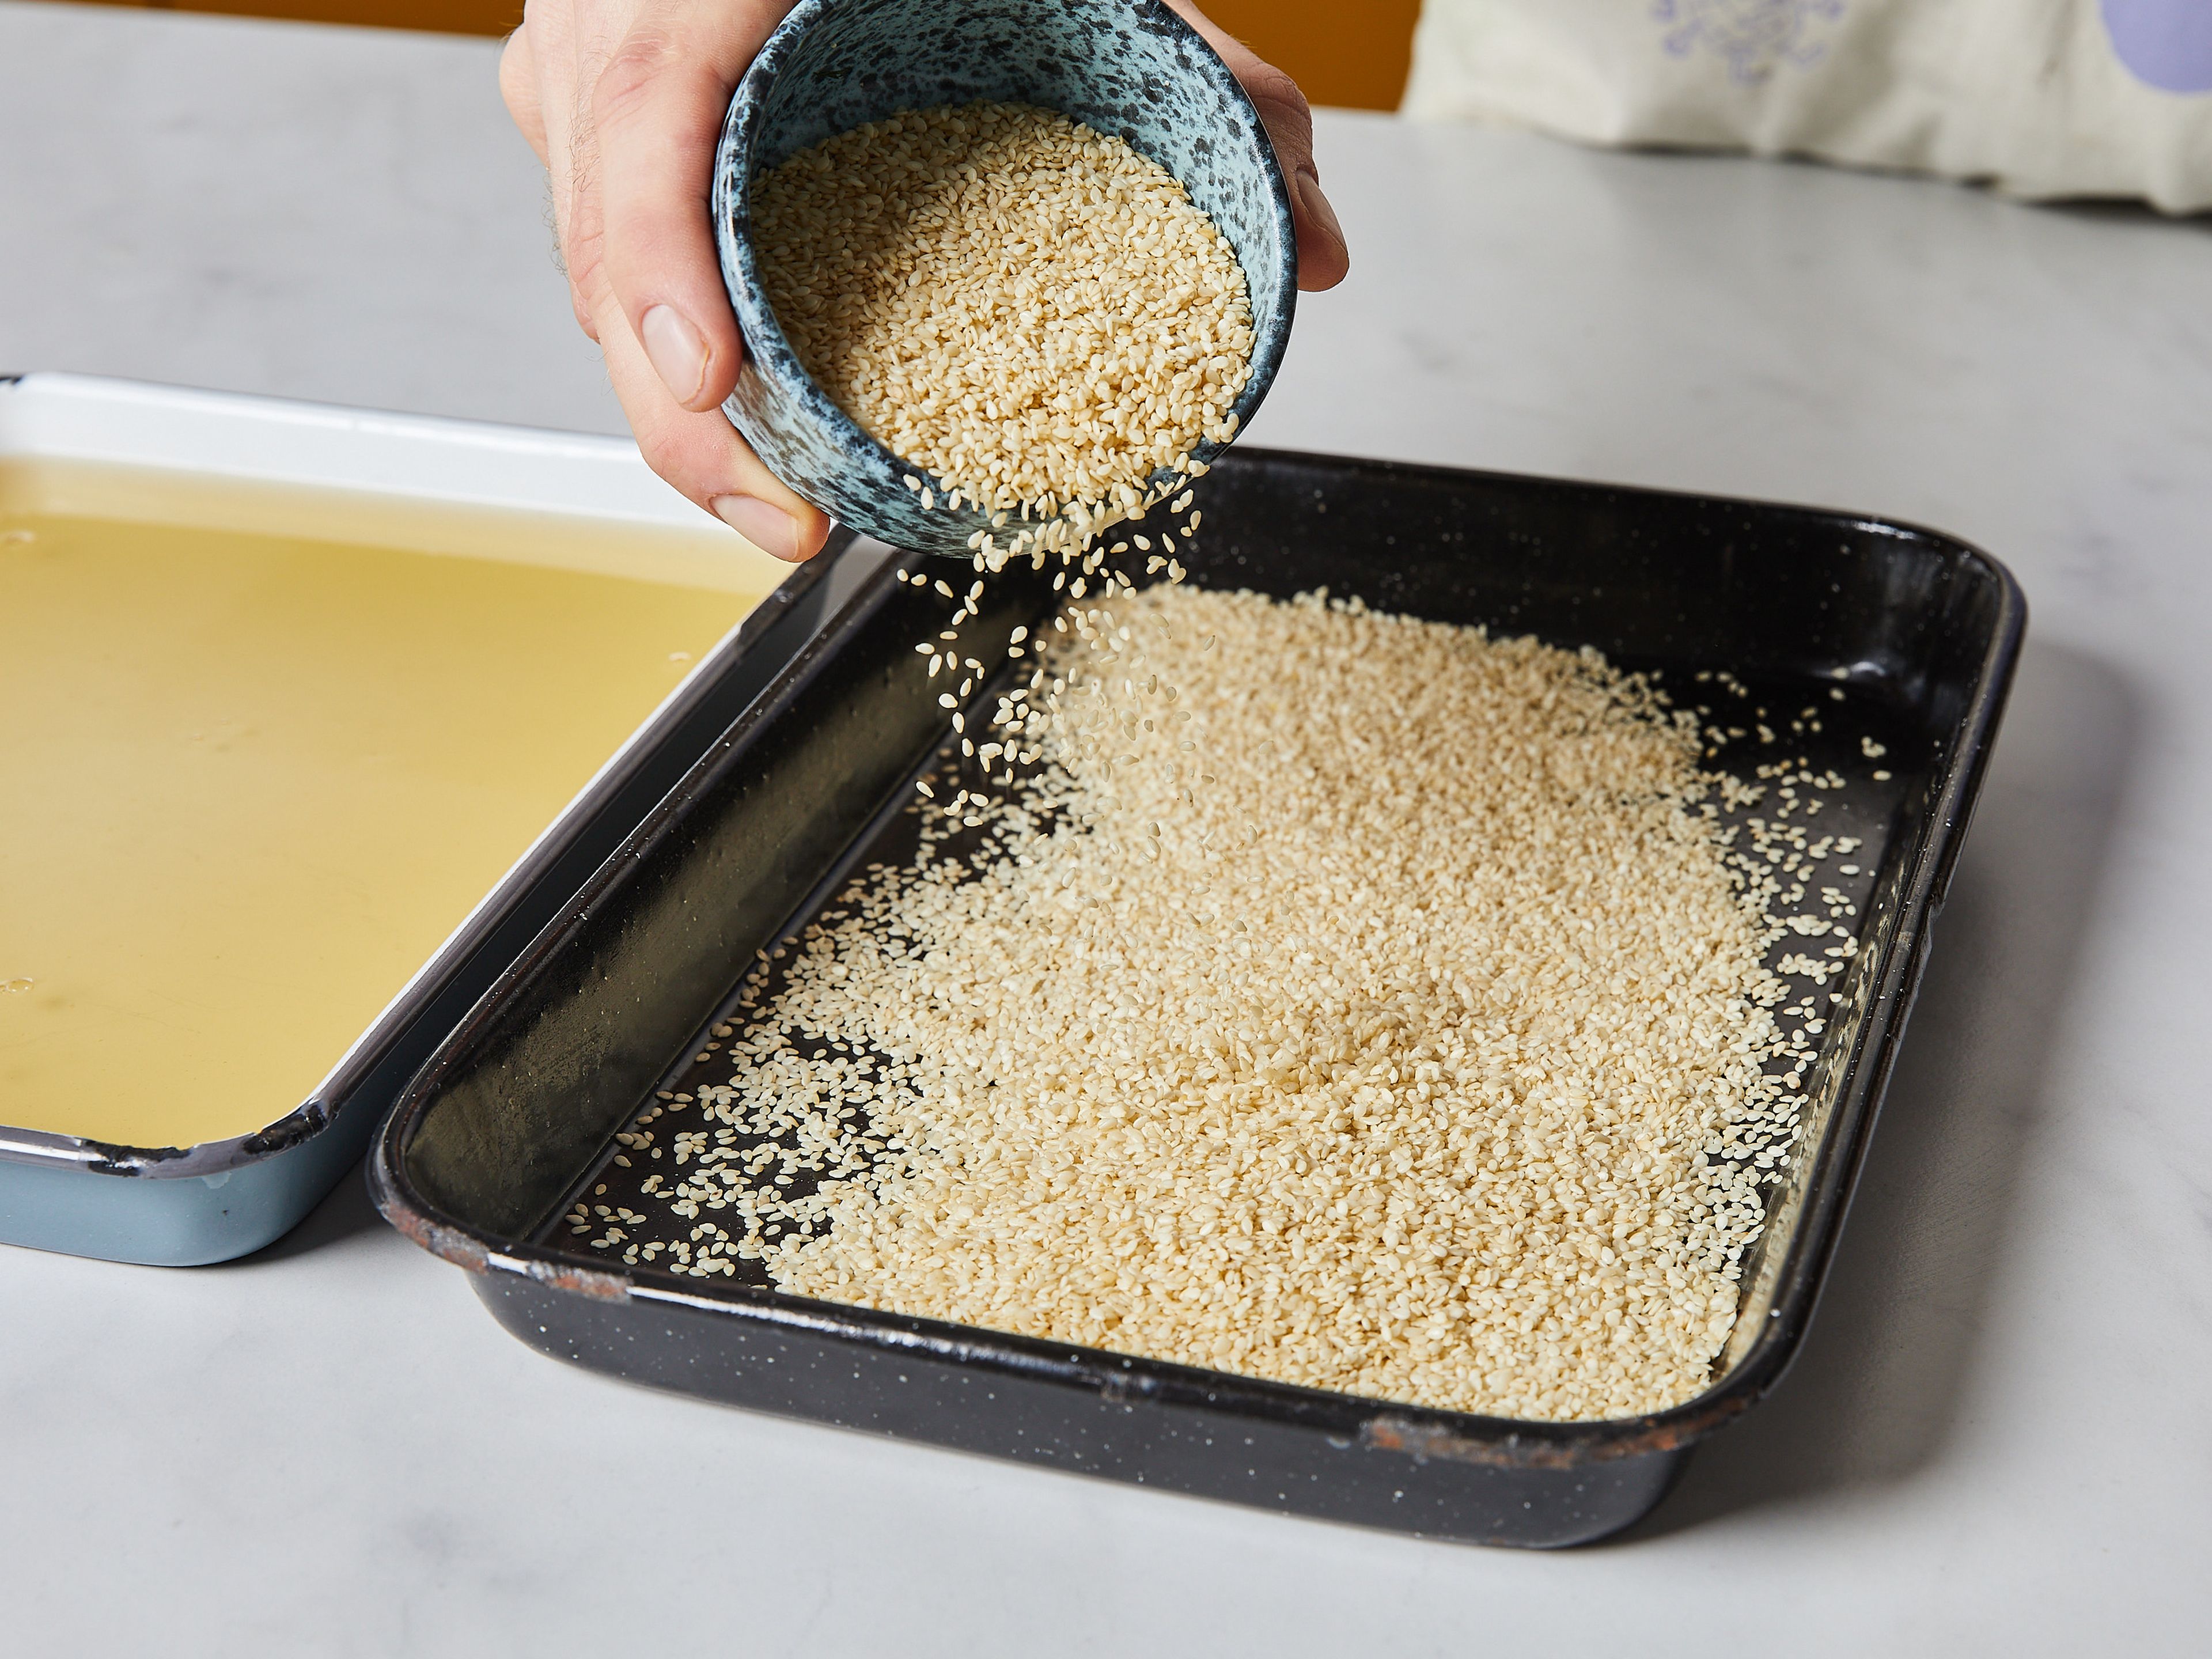 For the water bath: Add the rest of the water and honey to a shallow baking dish. Mix until dissolved. Add sesame seeds to a separate baking dish.